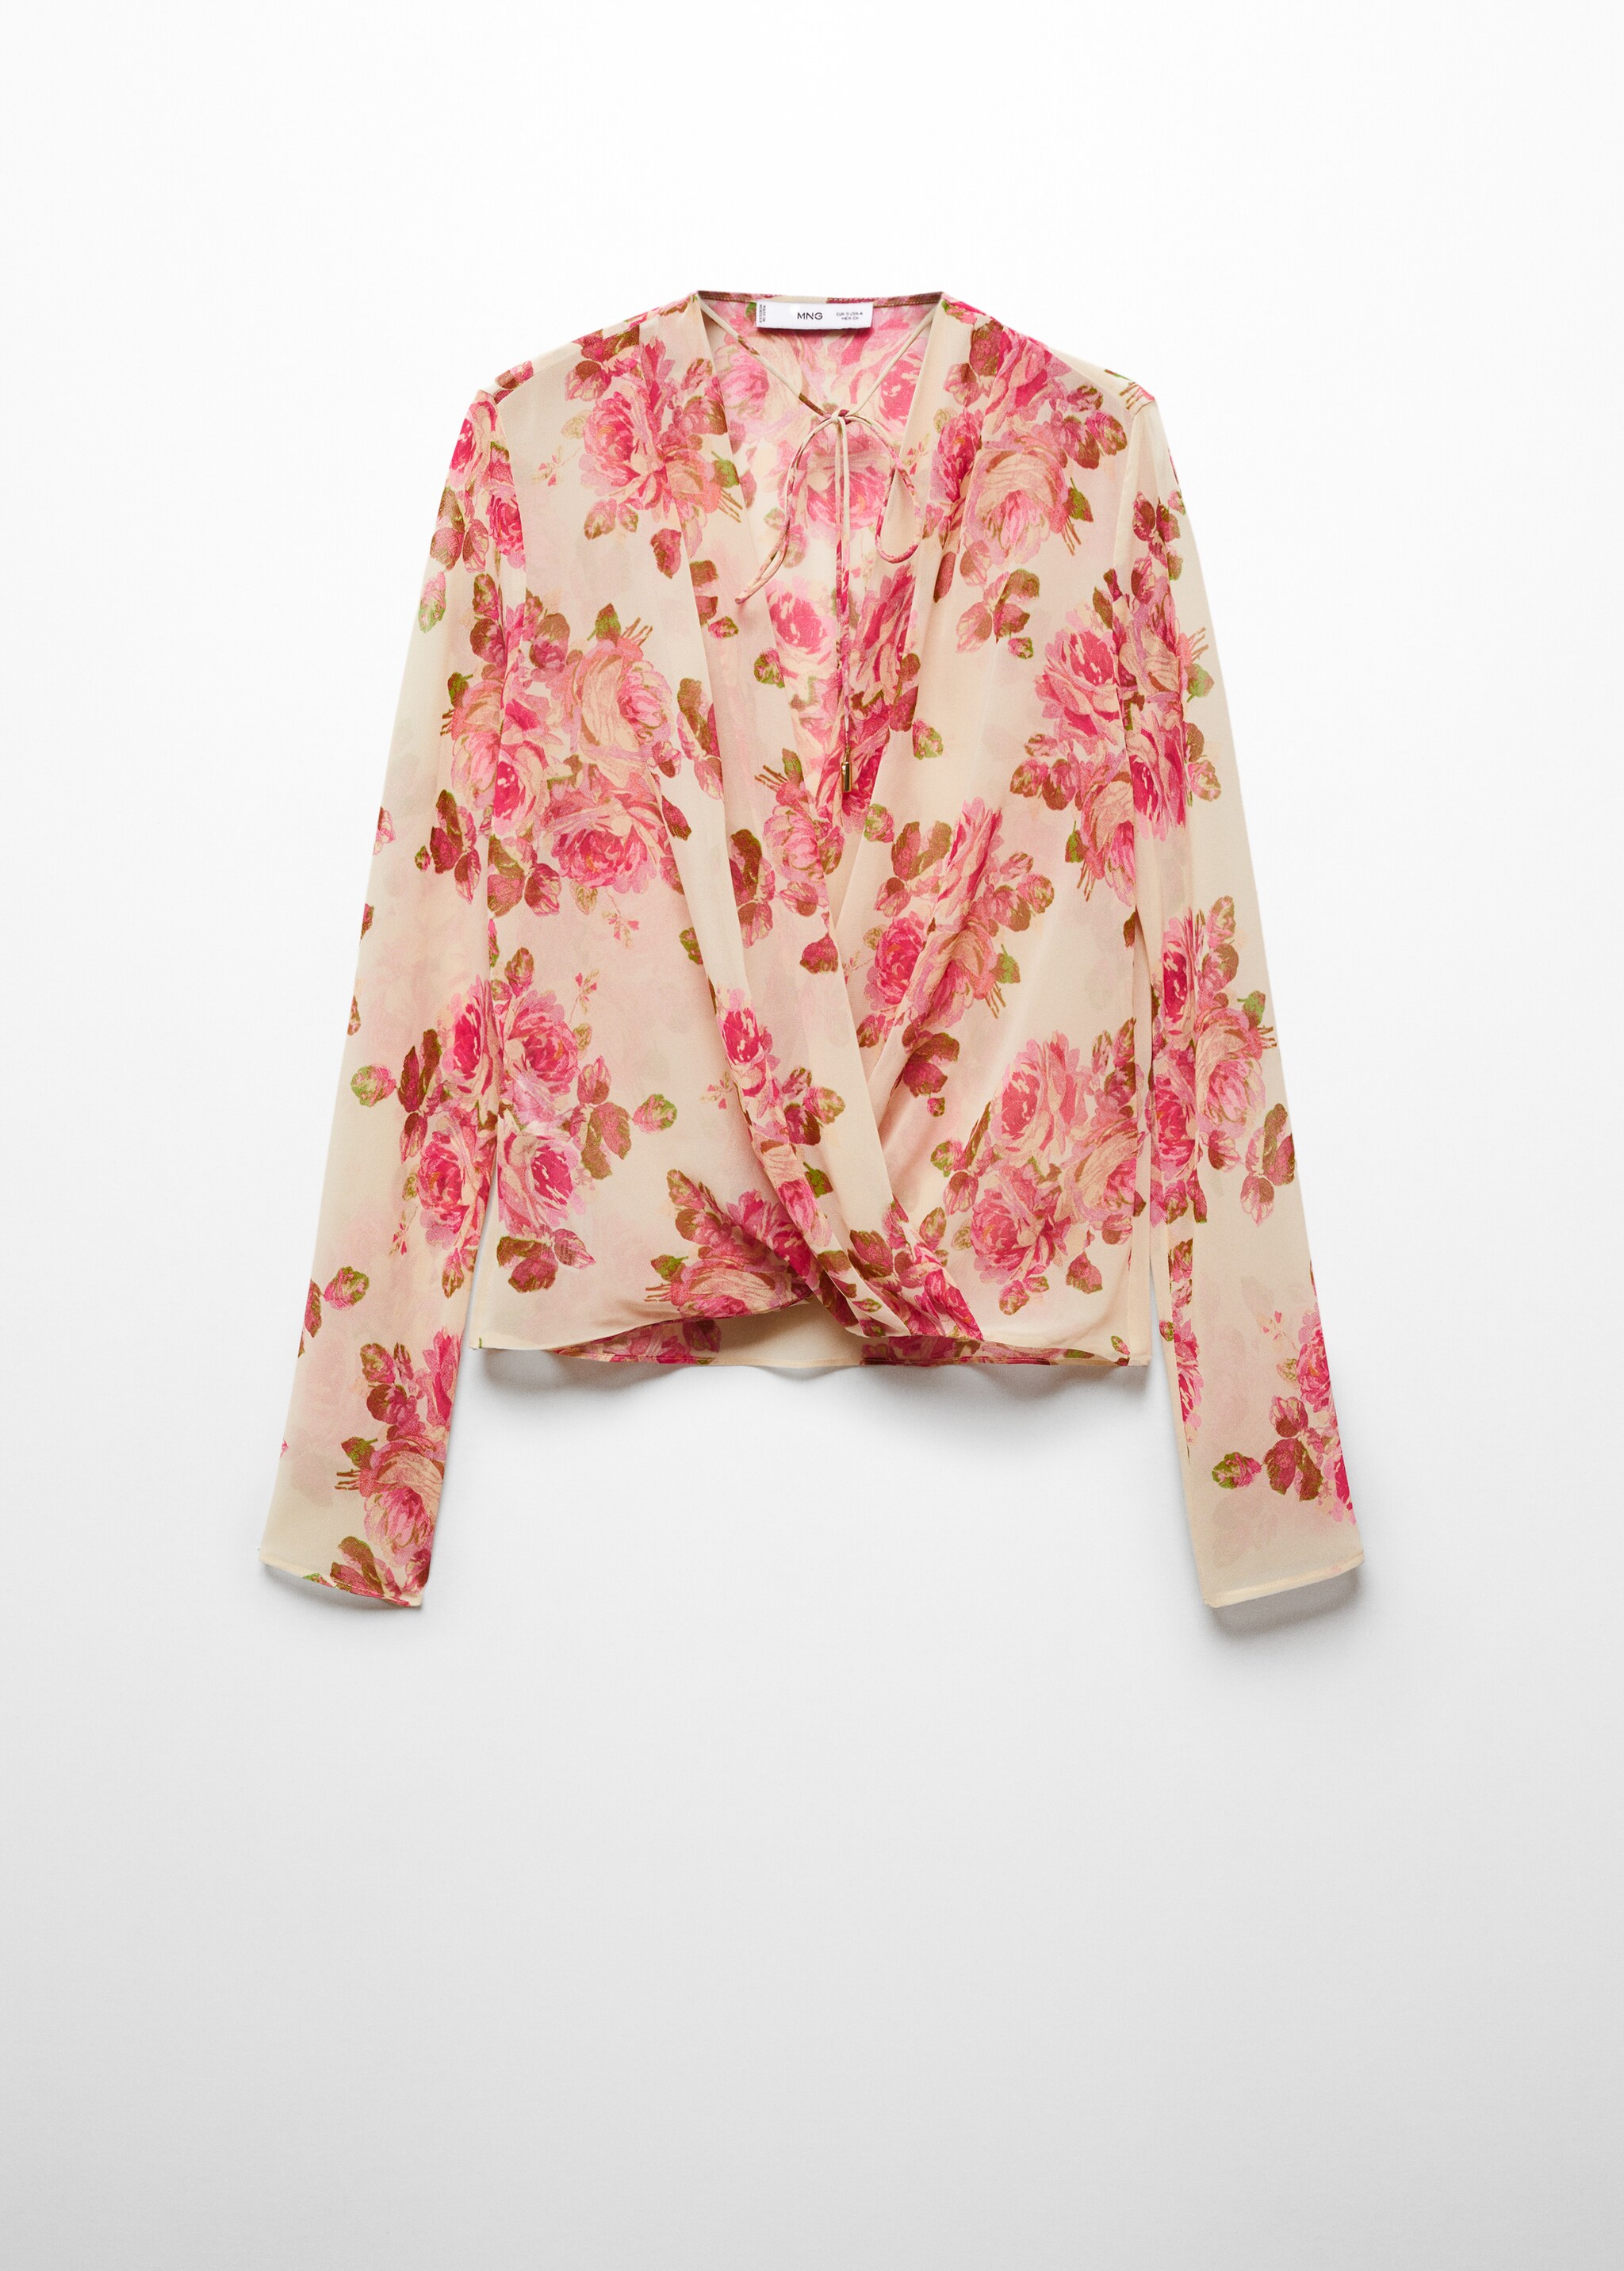 Floral print crossover blouse - Article without model